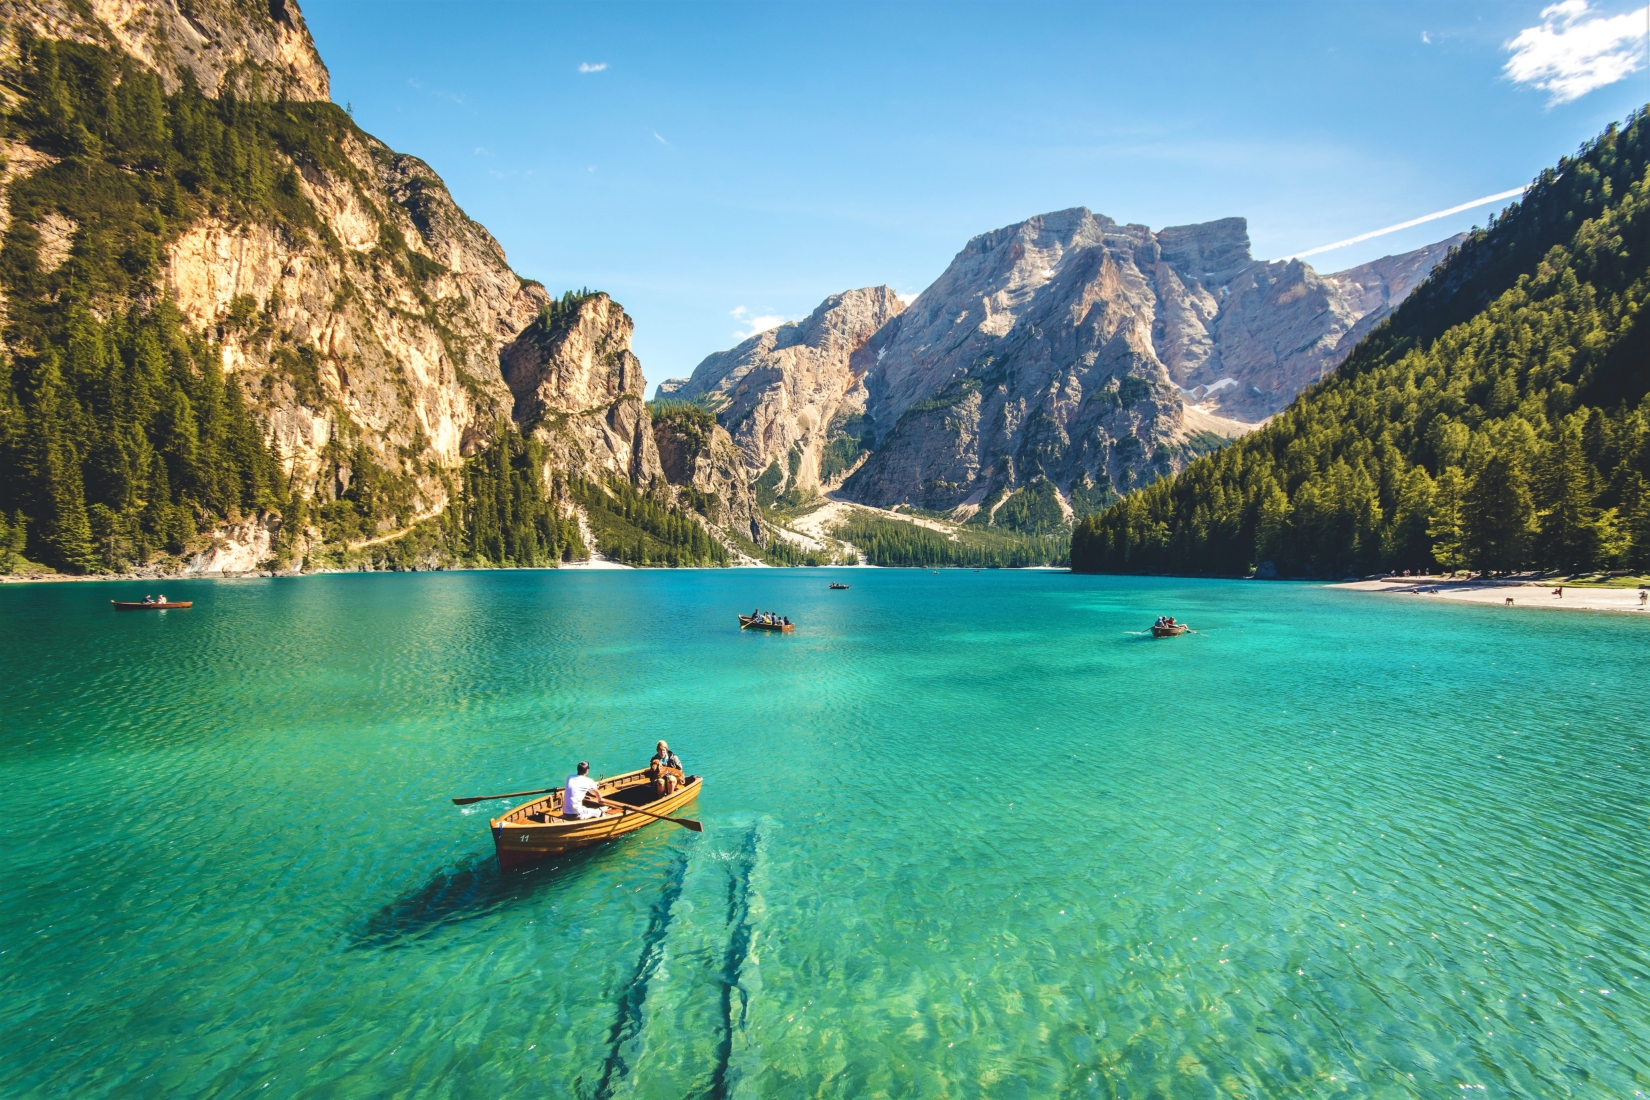 People traveling sustainably in wooden row boats floating on a clear turquoise lake surrounded by green mountains on a sunny day